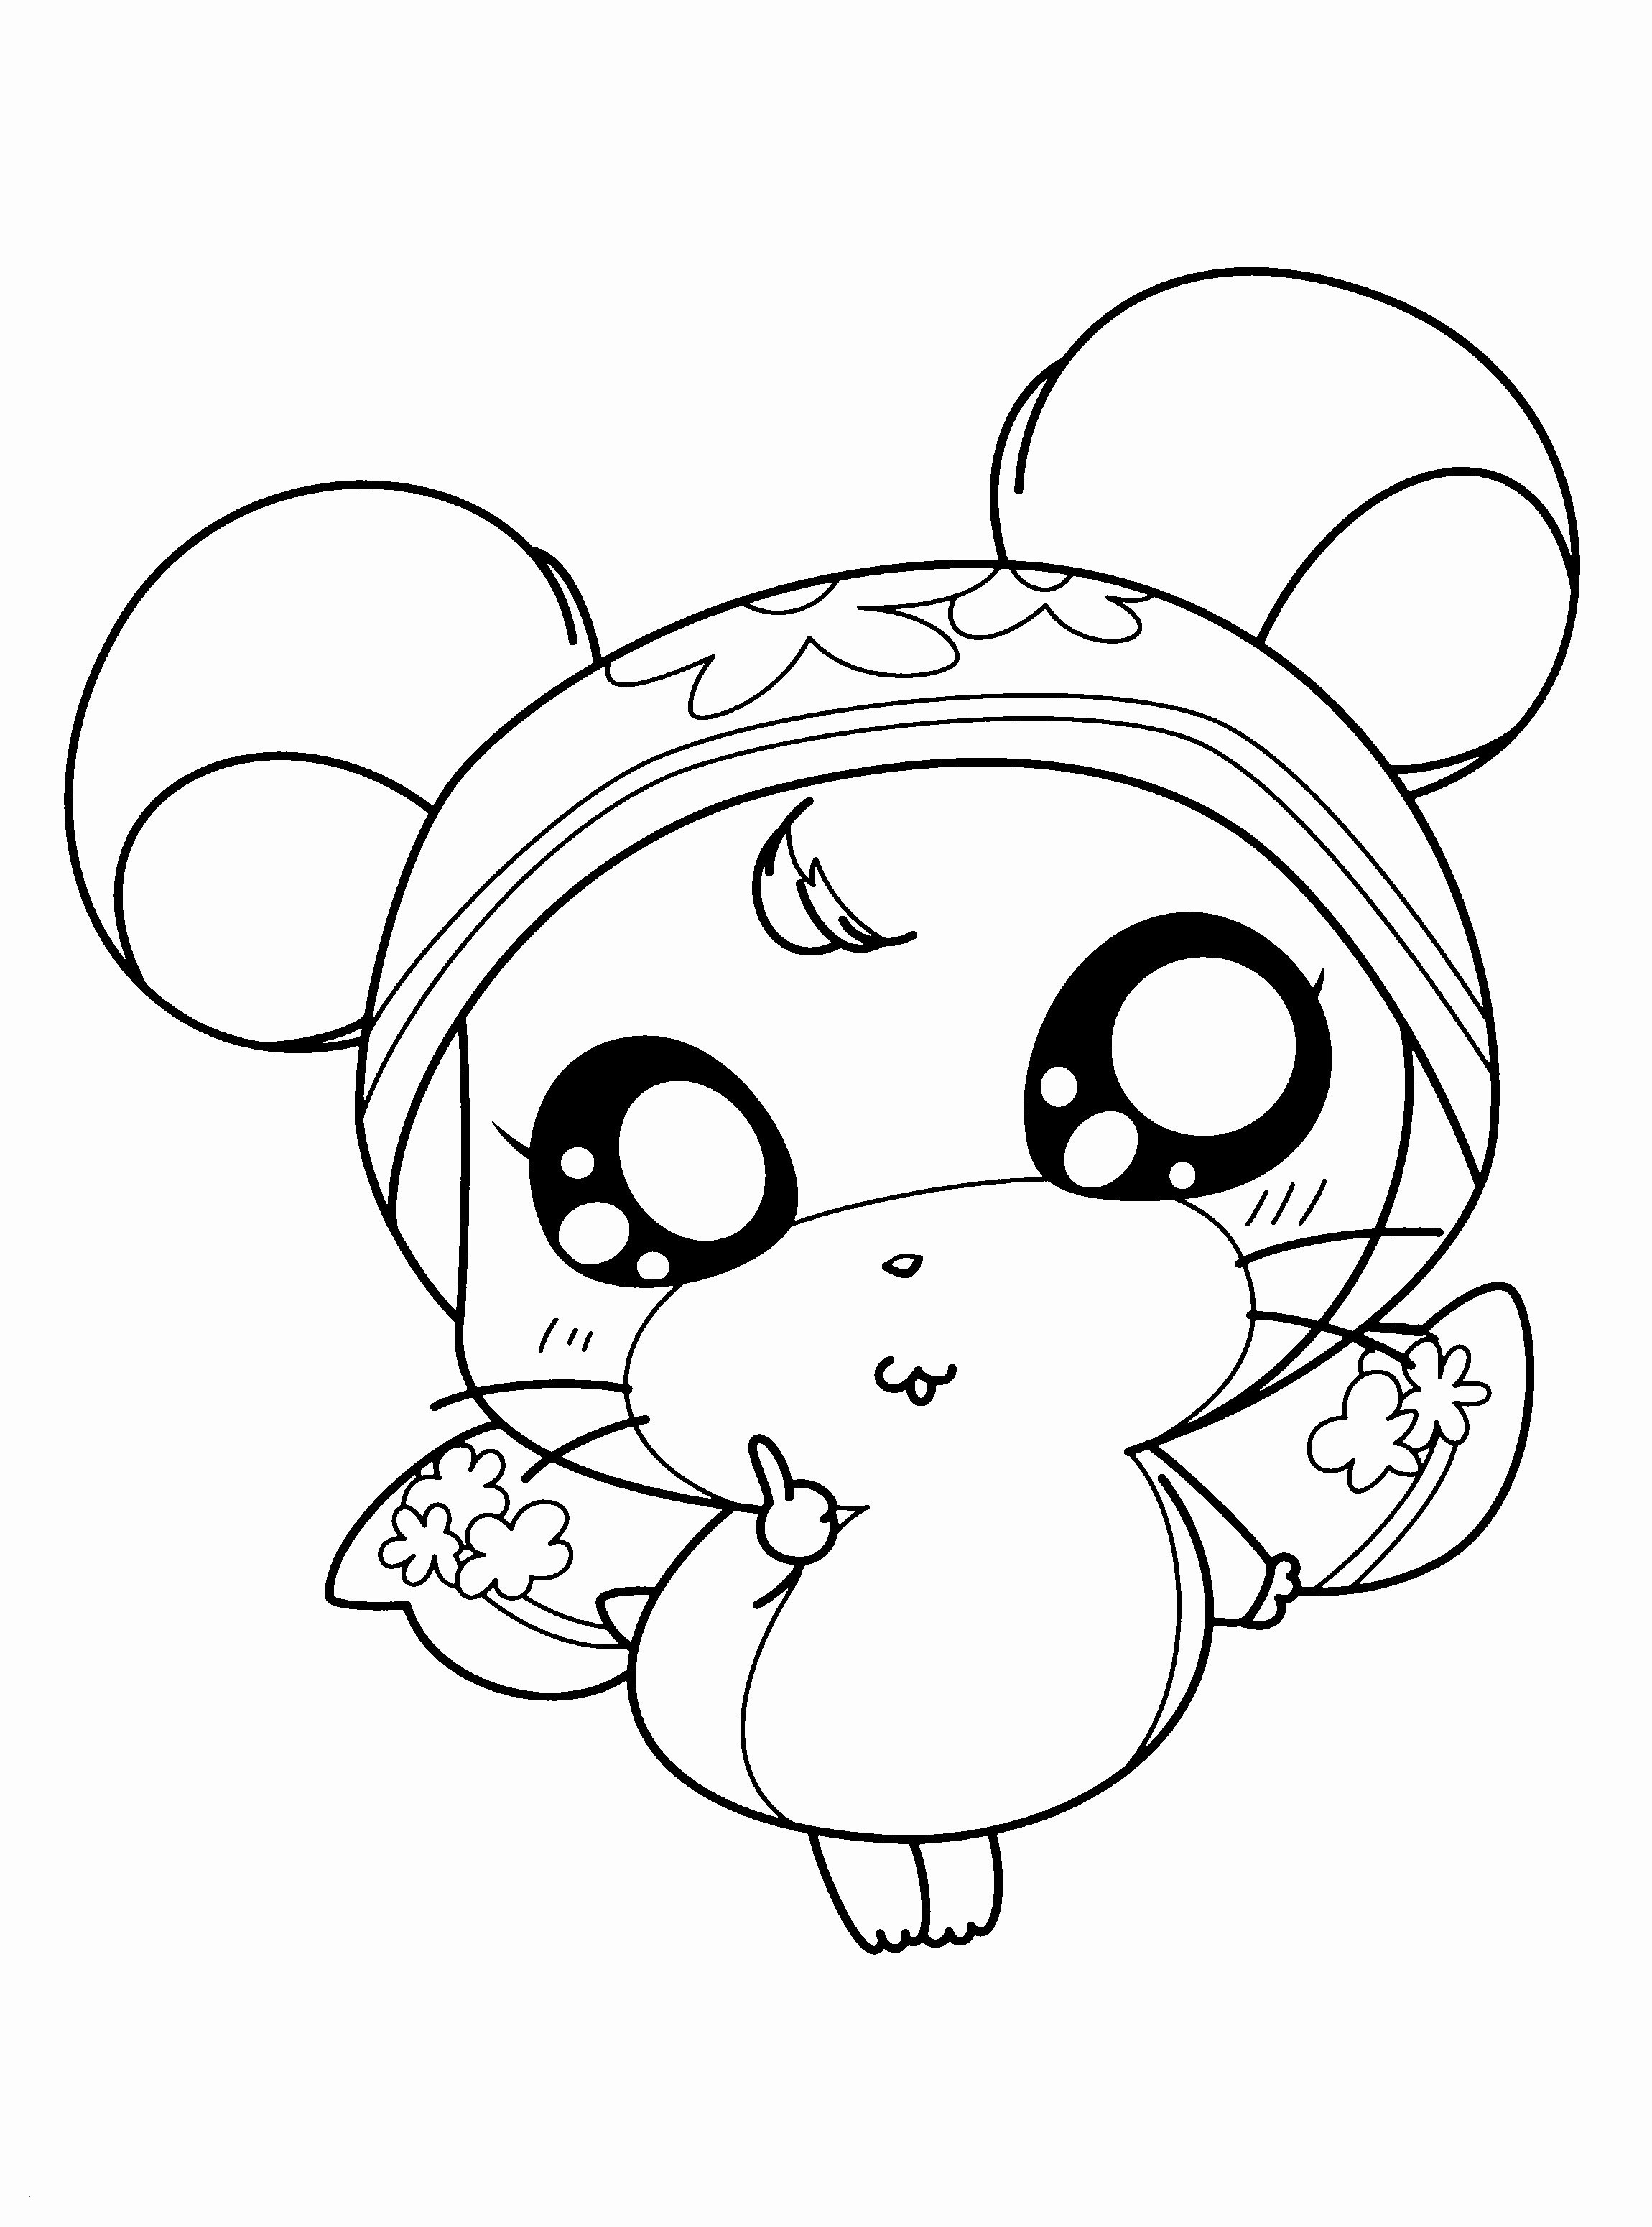 Pokemon Coloring Pages for Kids Wallpaper